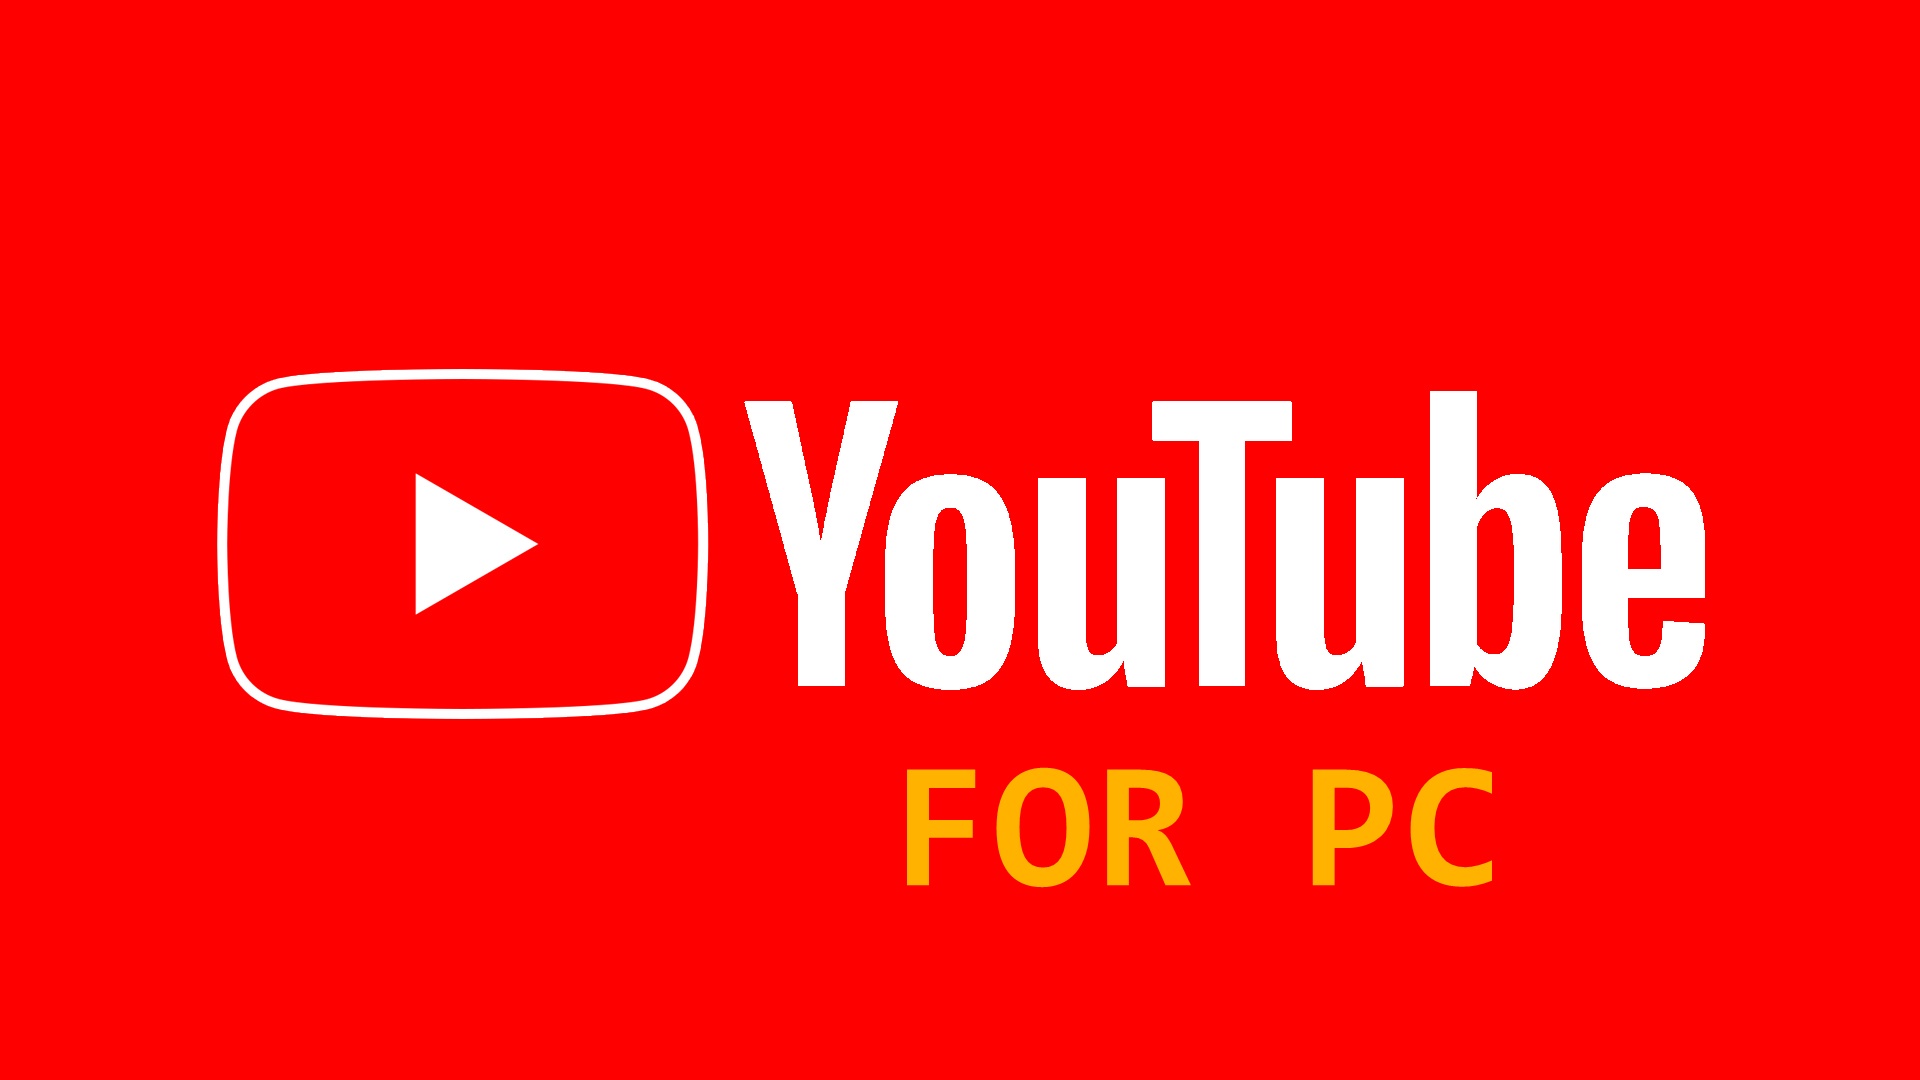 The image shows the YouTube logo with the text "YouTube for PC" below it. The image is about downloading YouTube videos on PC without using any apps.